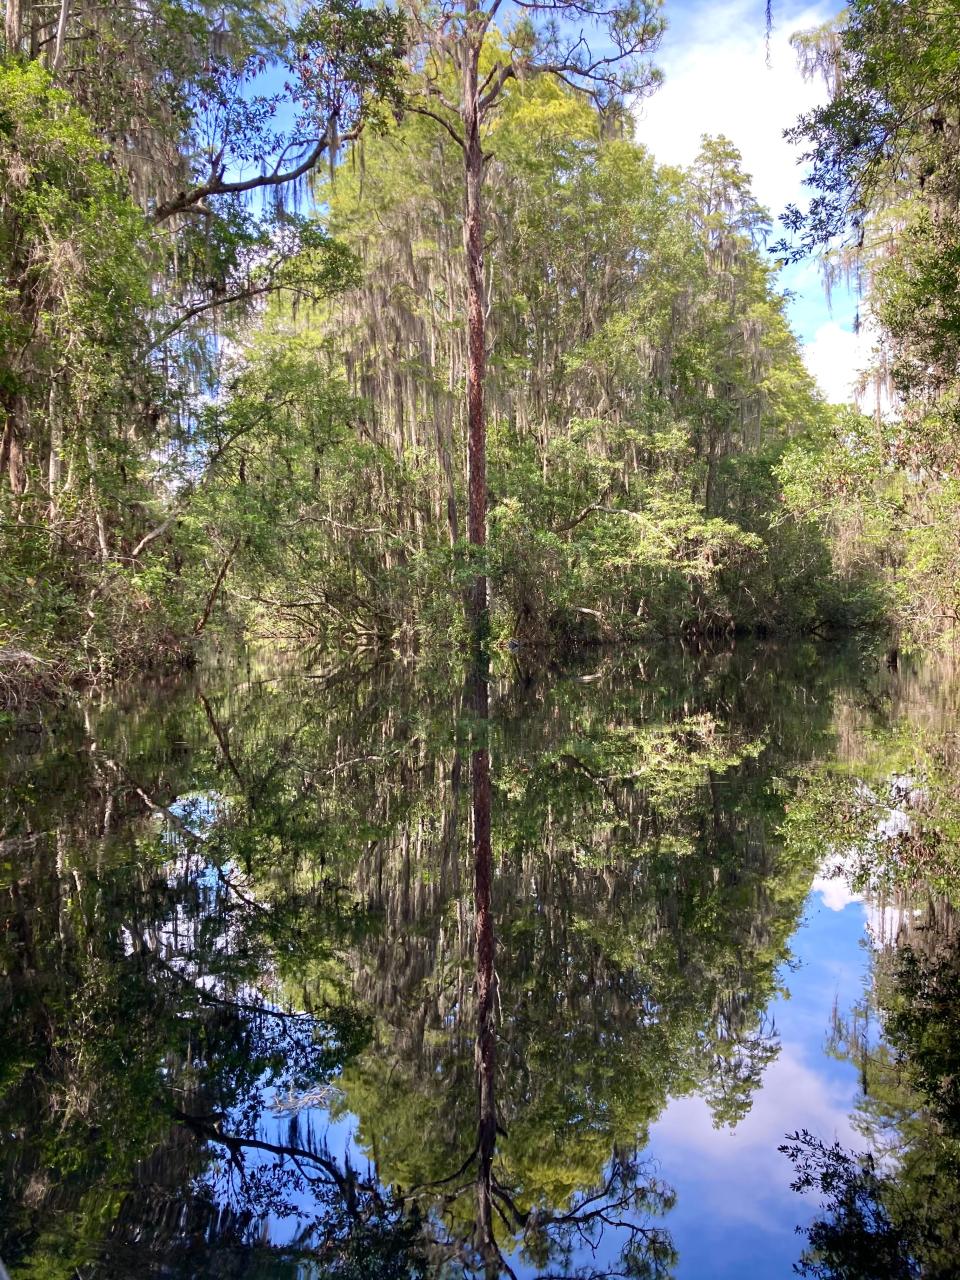 Junction of main canal and blue trail at Okefenokee Swamp.